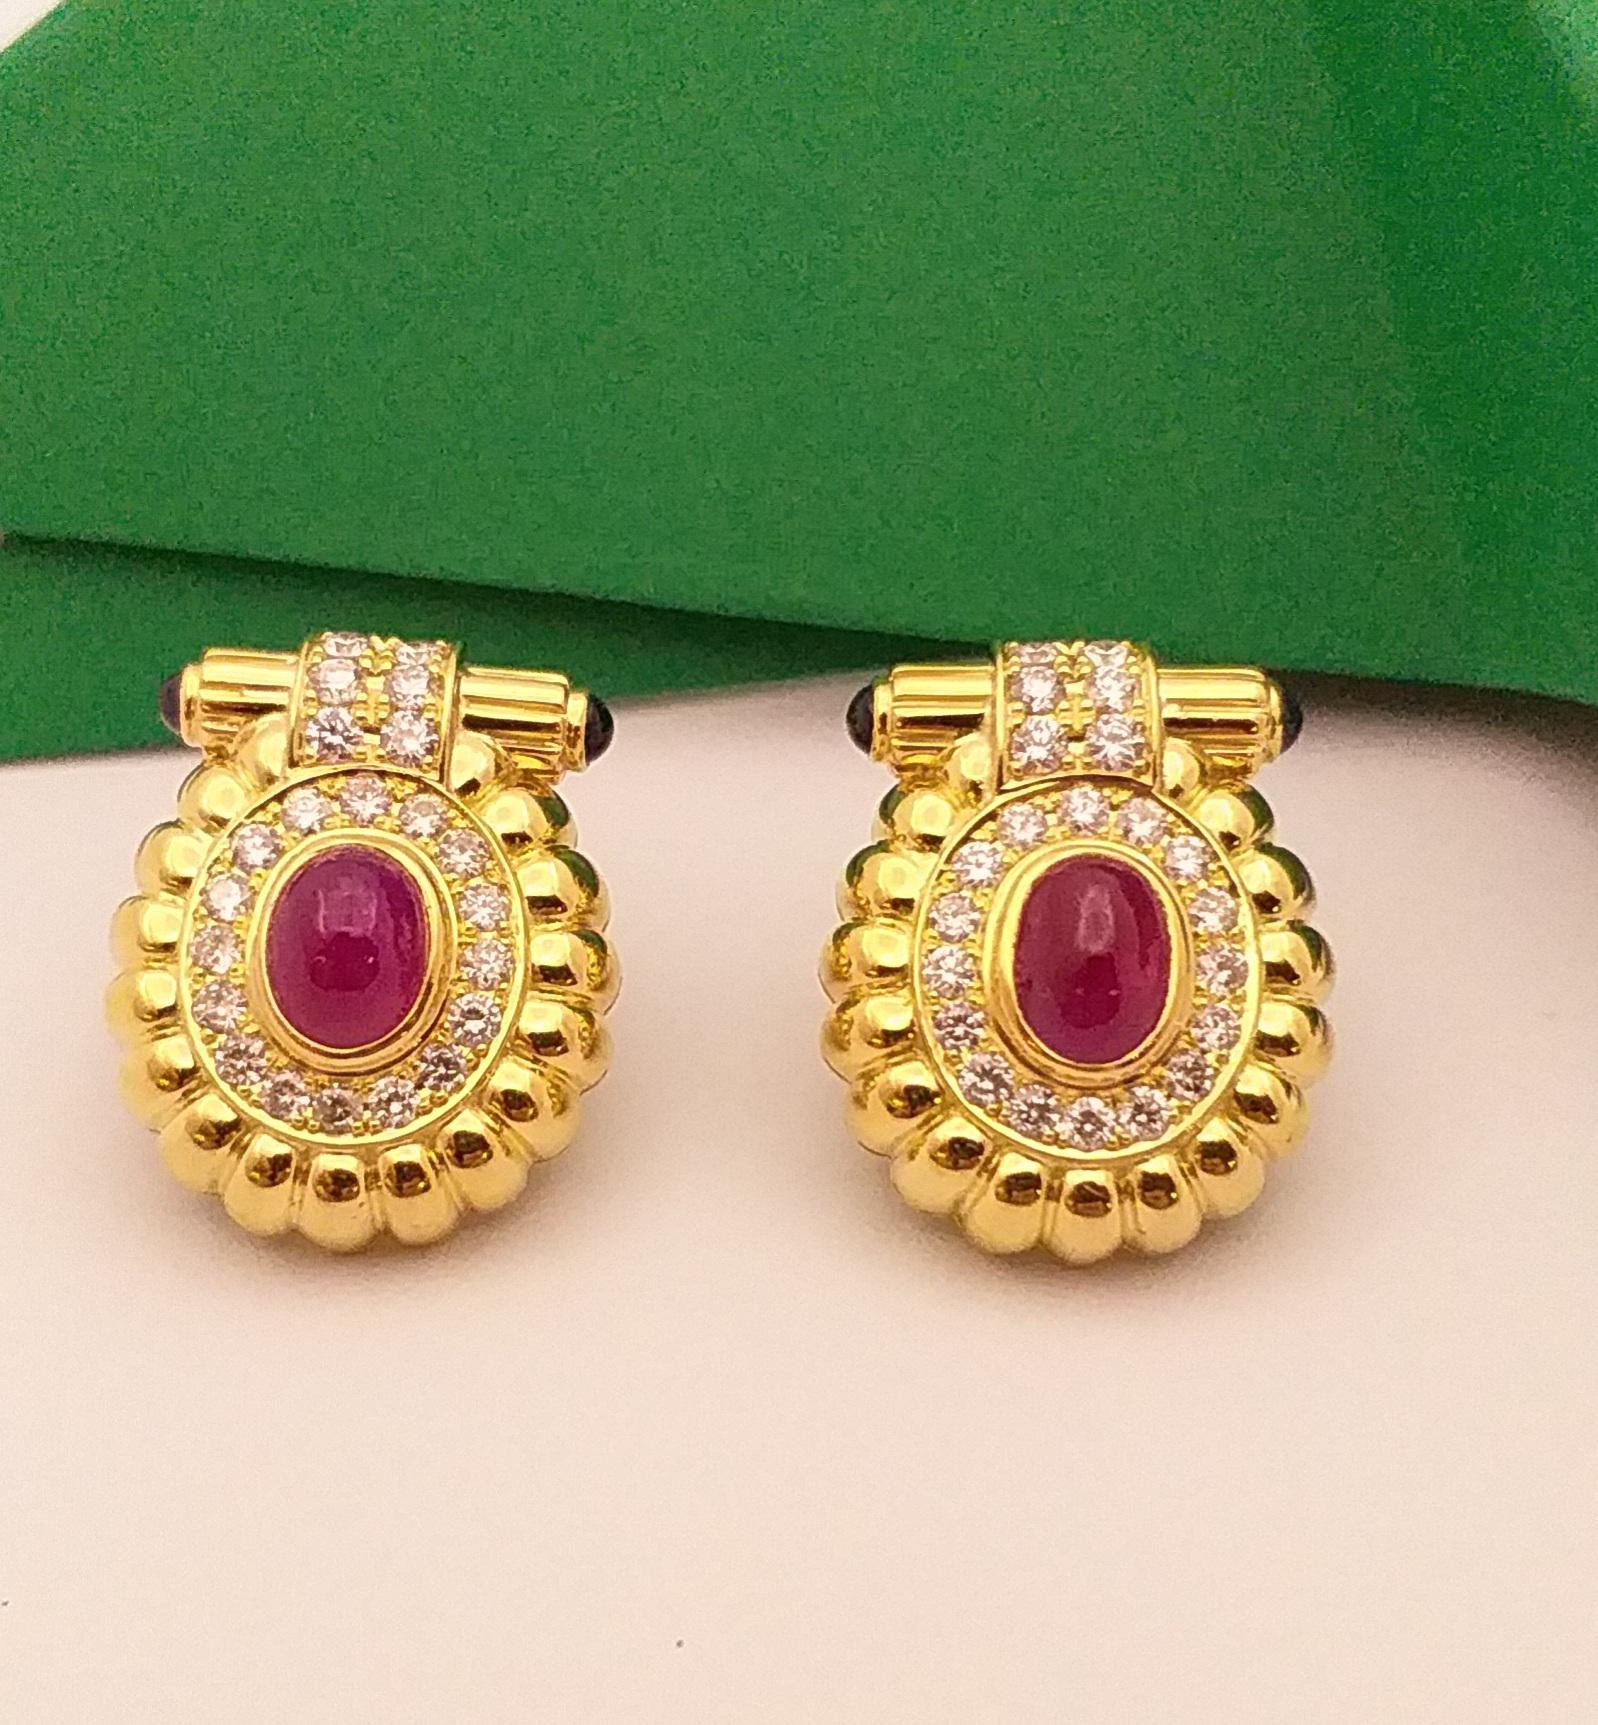 Cabochon Ruby with Diamond and Cabochon Blue Sapphire Earrings in 18 Karat Gold For Sale 6